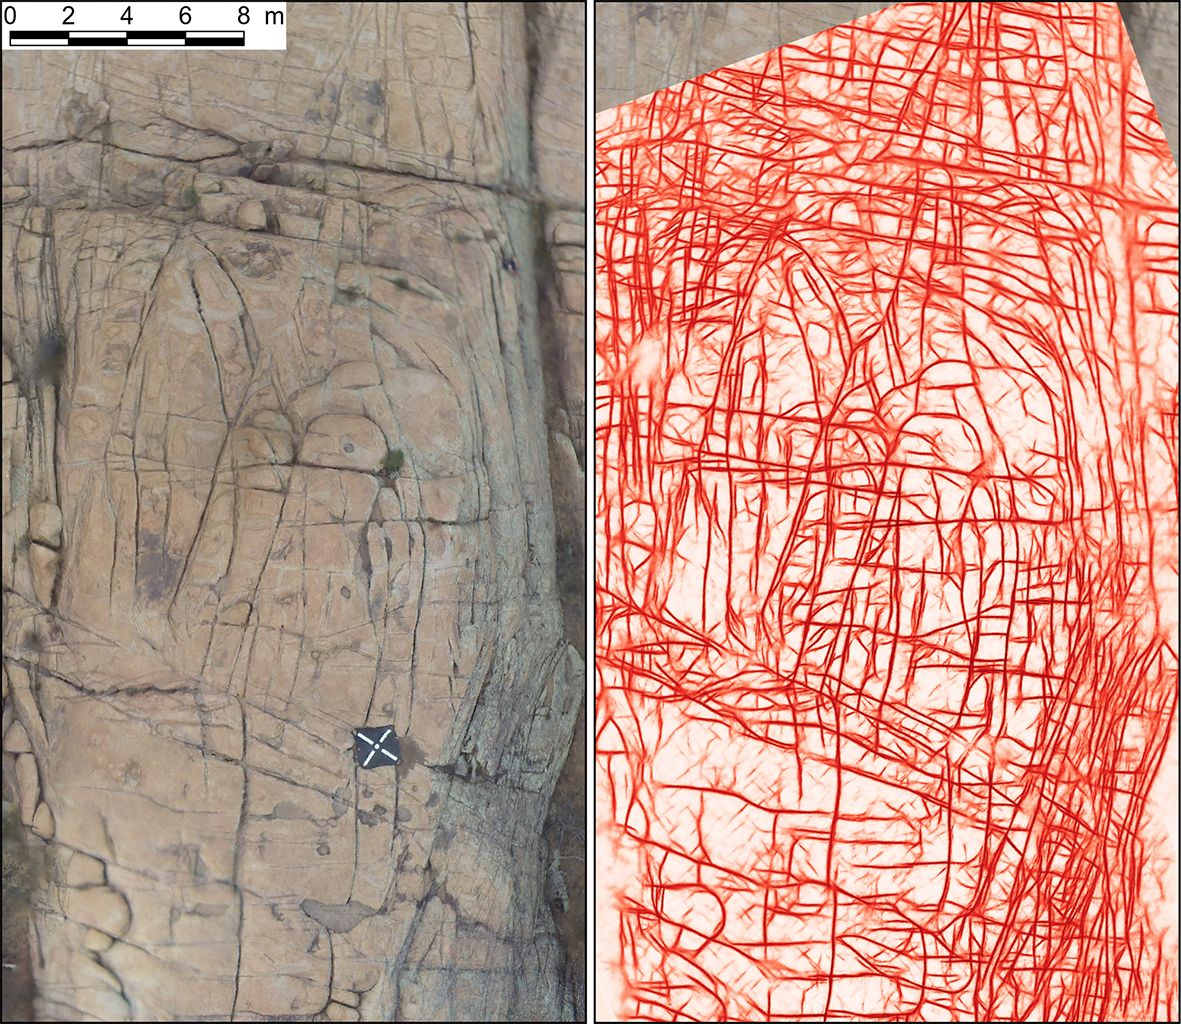 Automated fault identification and mapping with deep learning (L. Mattéo PhD thesis, 2019) (left: raw optical drone image of a network of small natural faults in Arizona, faults as grey lines; right: automatic deep learning mapping faults as red lines)